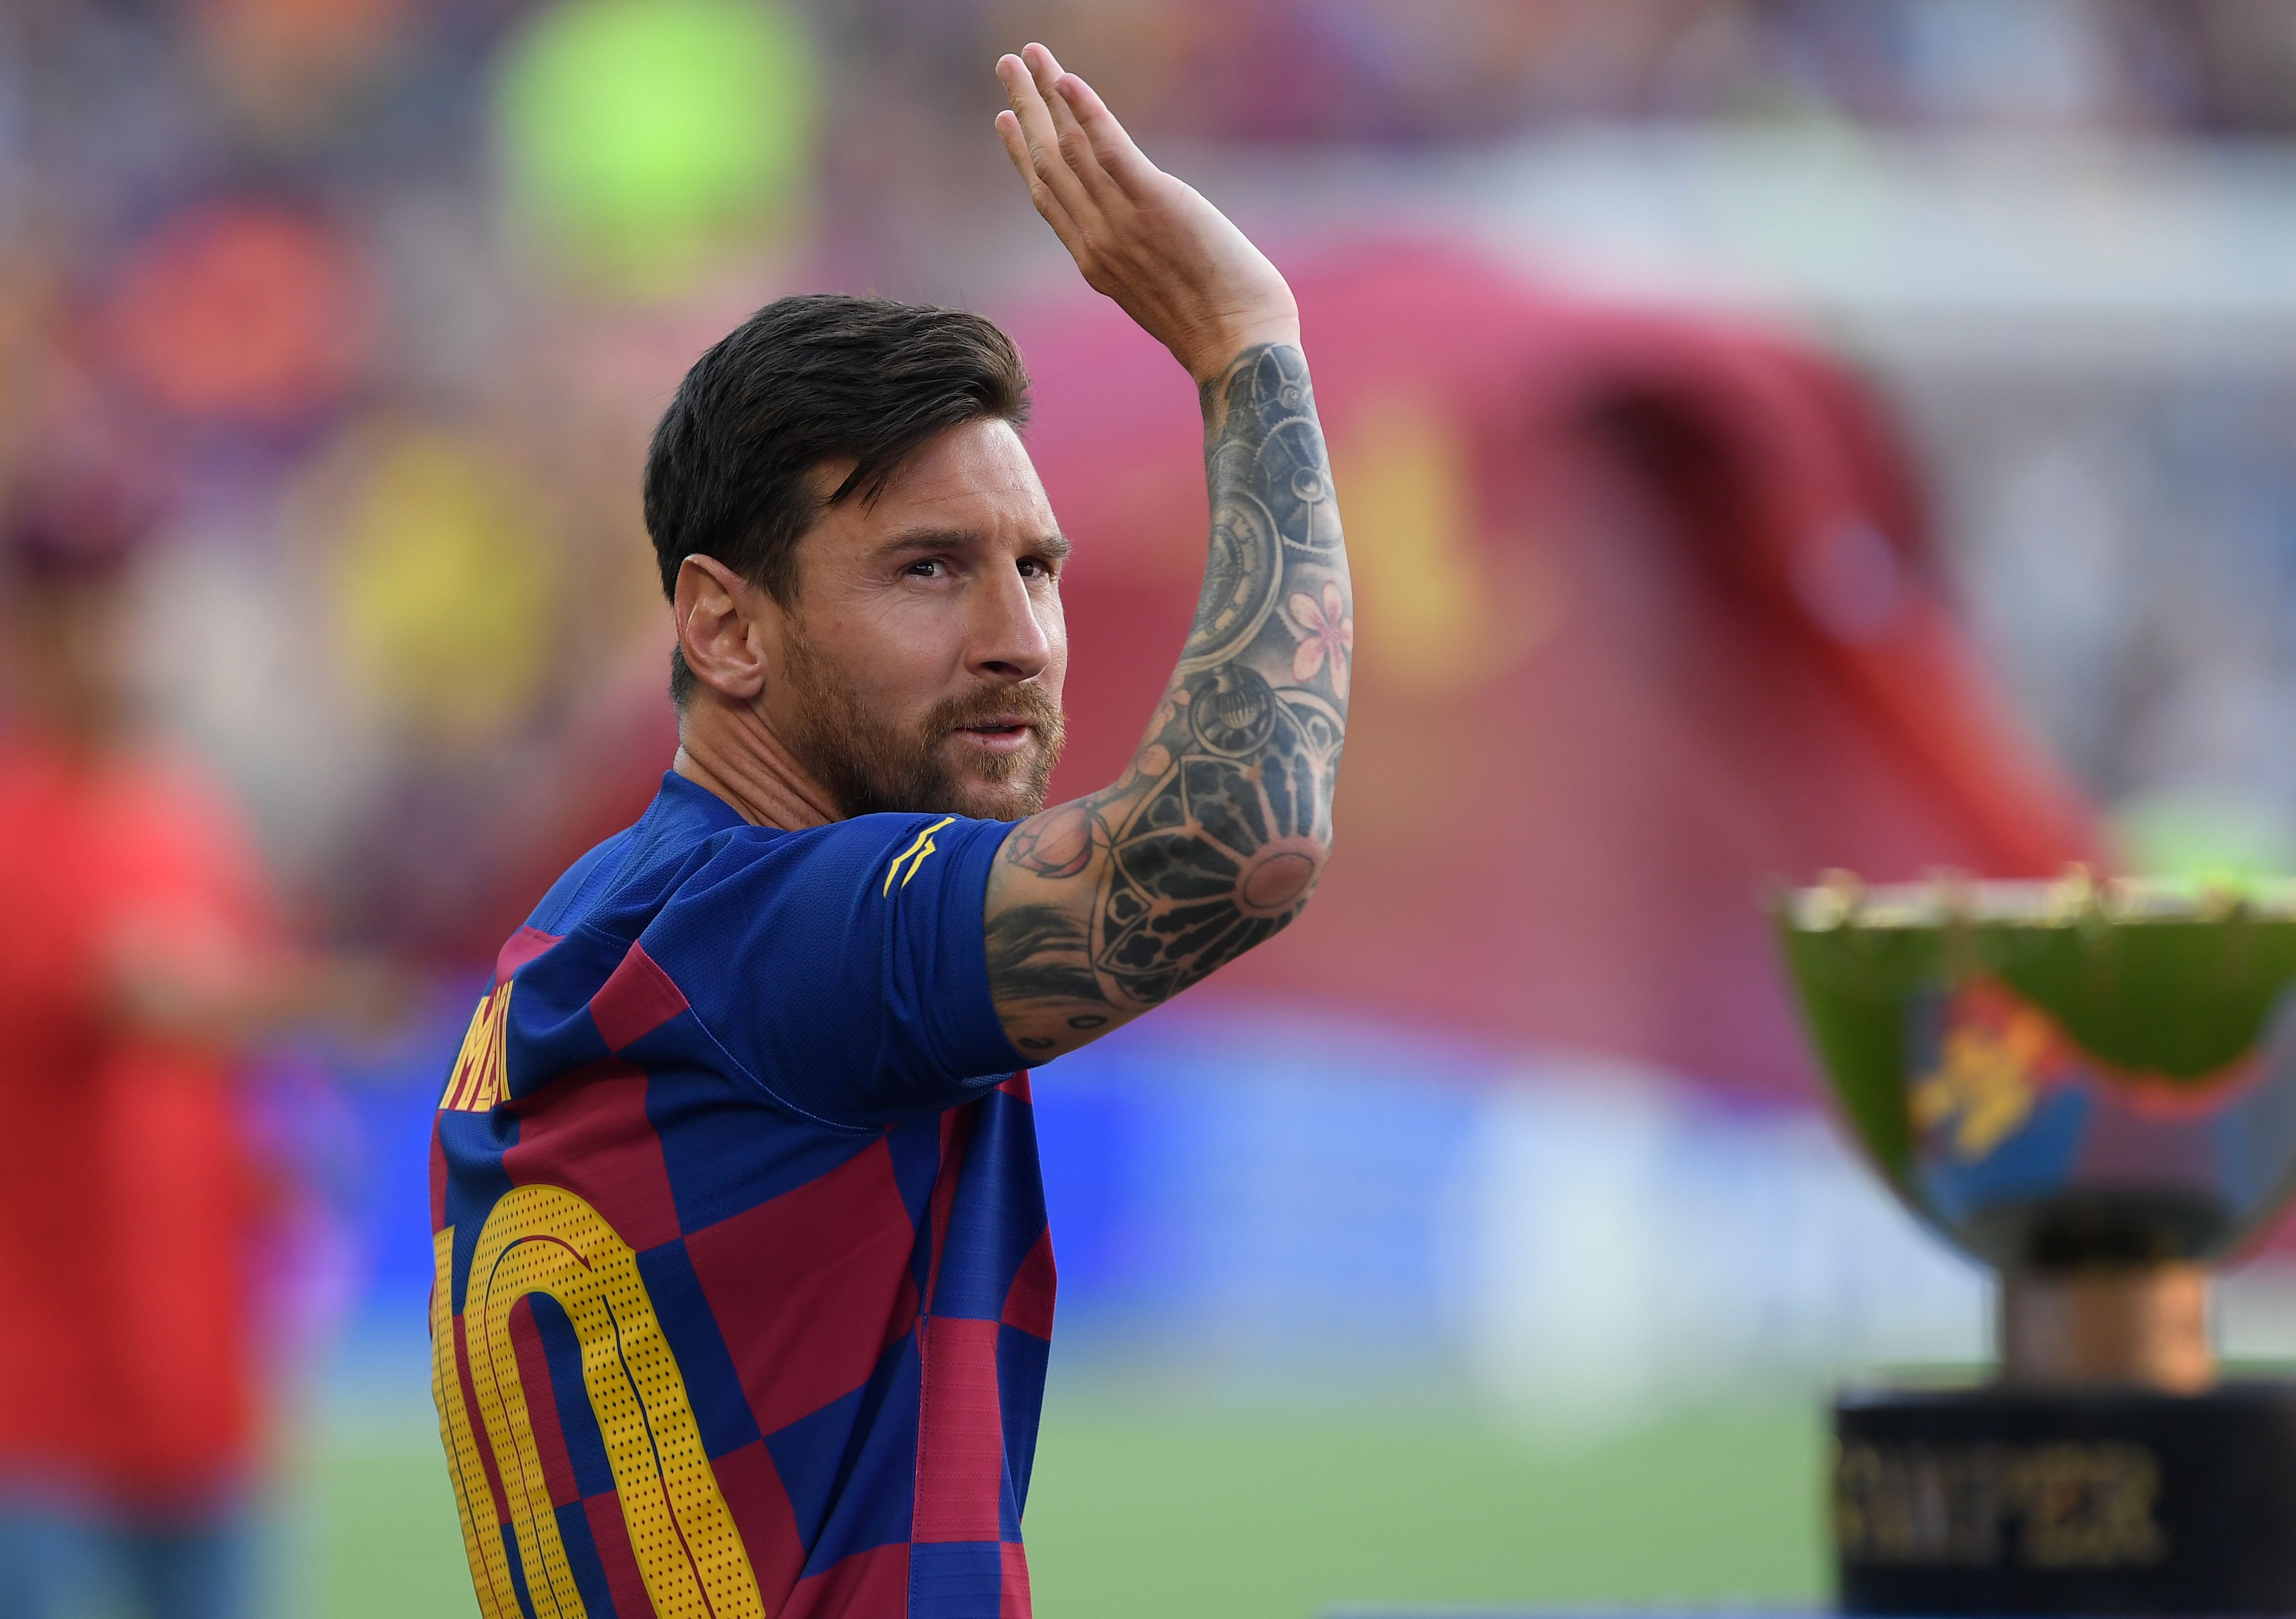 Messi's Barcelona future is uncertain. (Photo by Josep Lago/AFP/Getty Images)